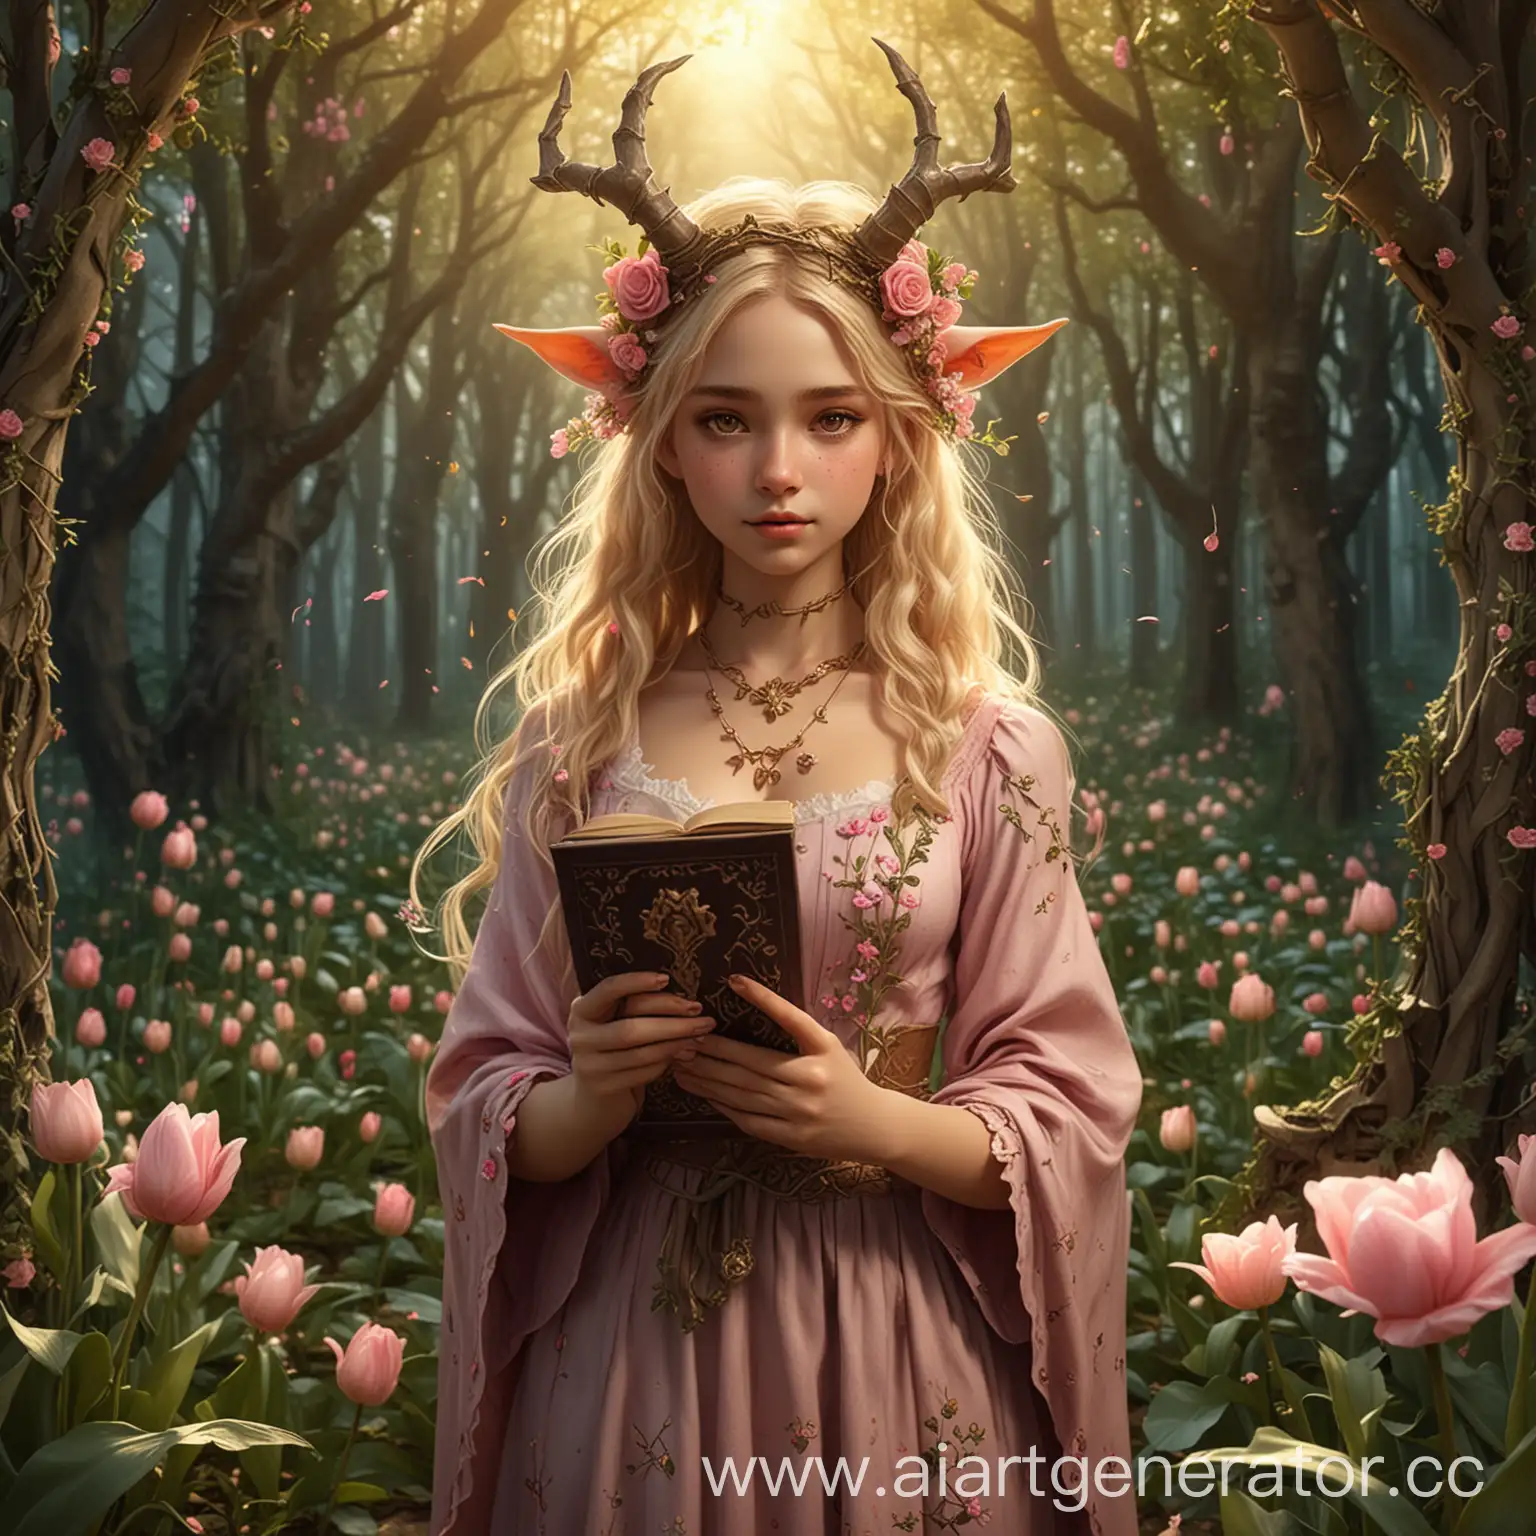 Enchanting-Dryad-Girl-with-Magic-Book-in-Forest-Dweller-Costume